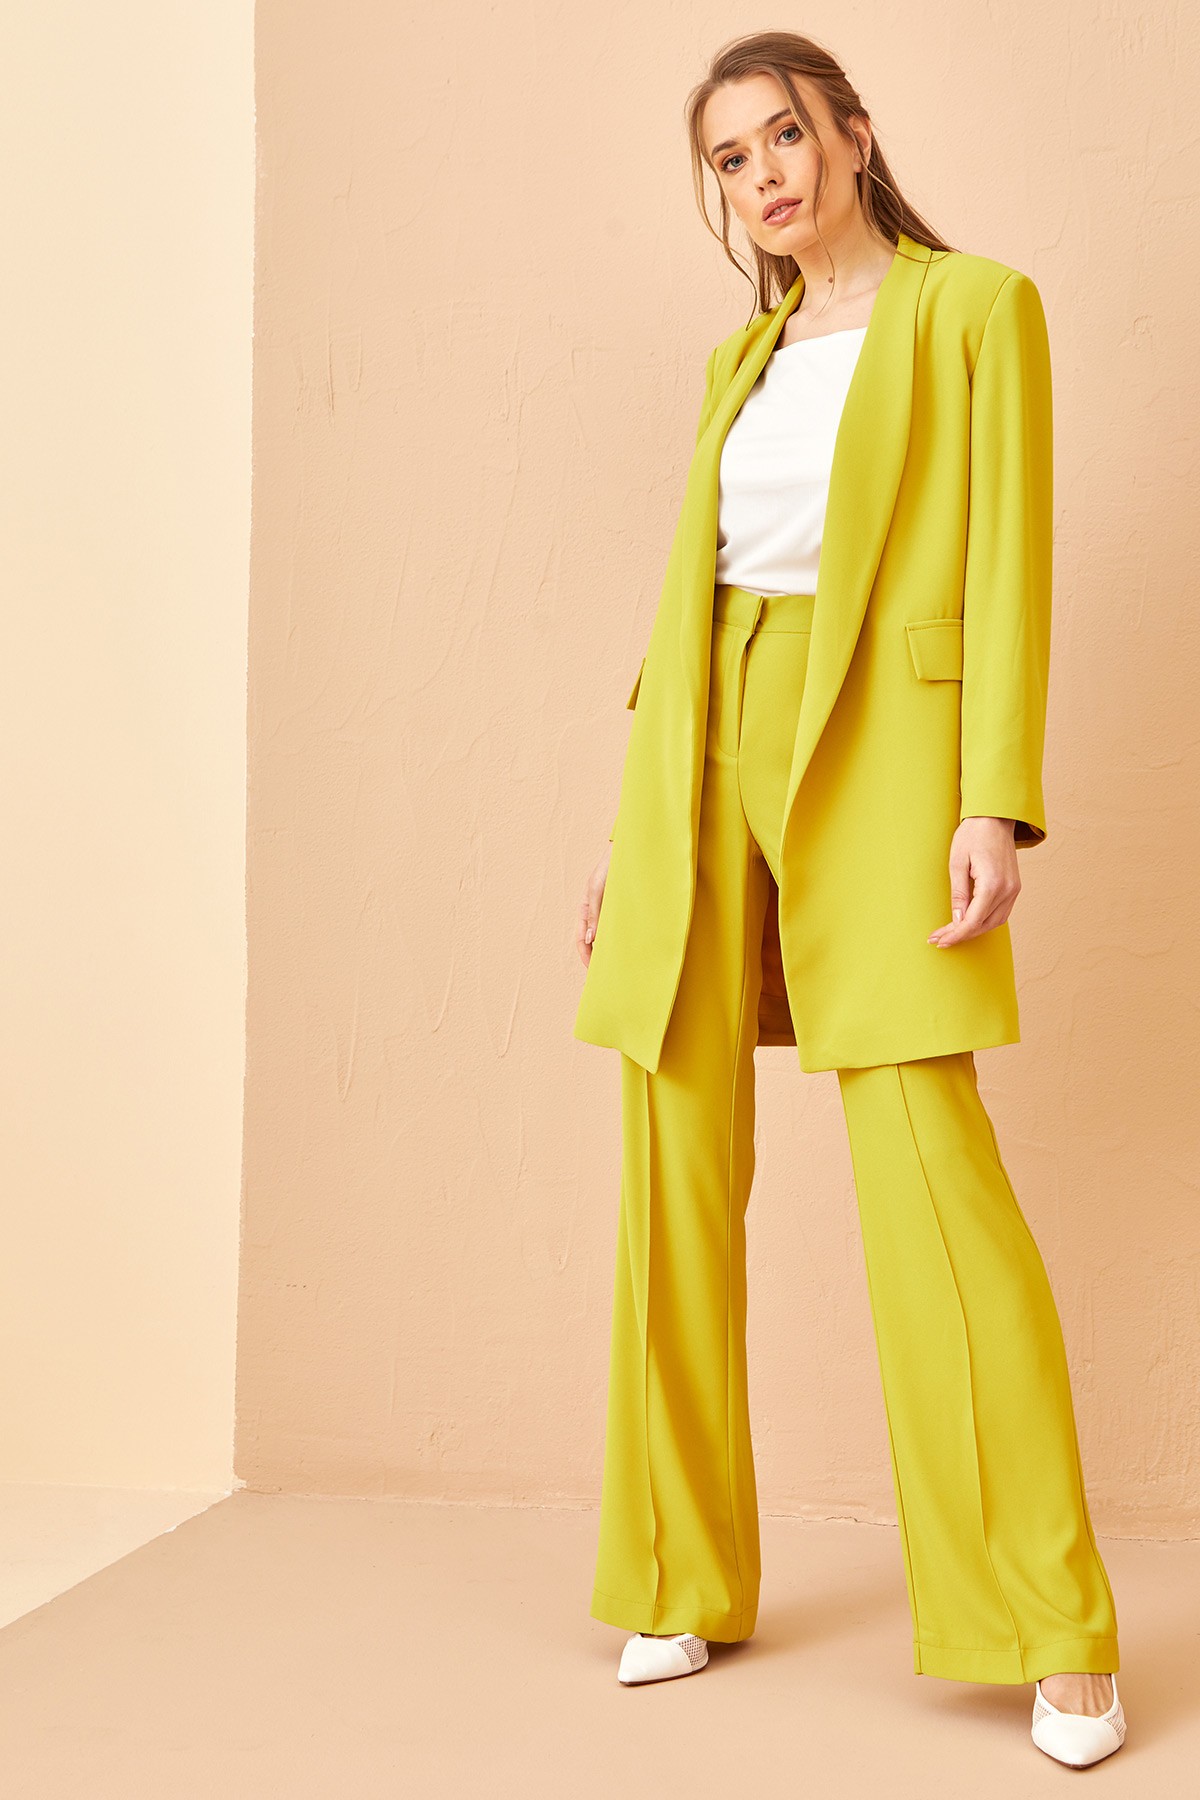 Shawl Collar With Belt Suit Yellow